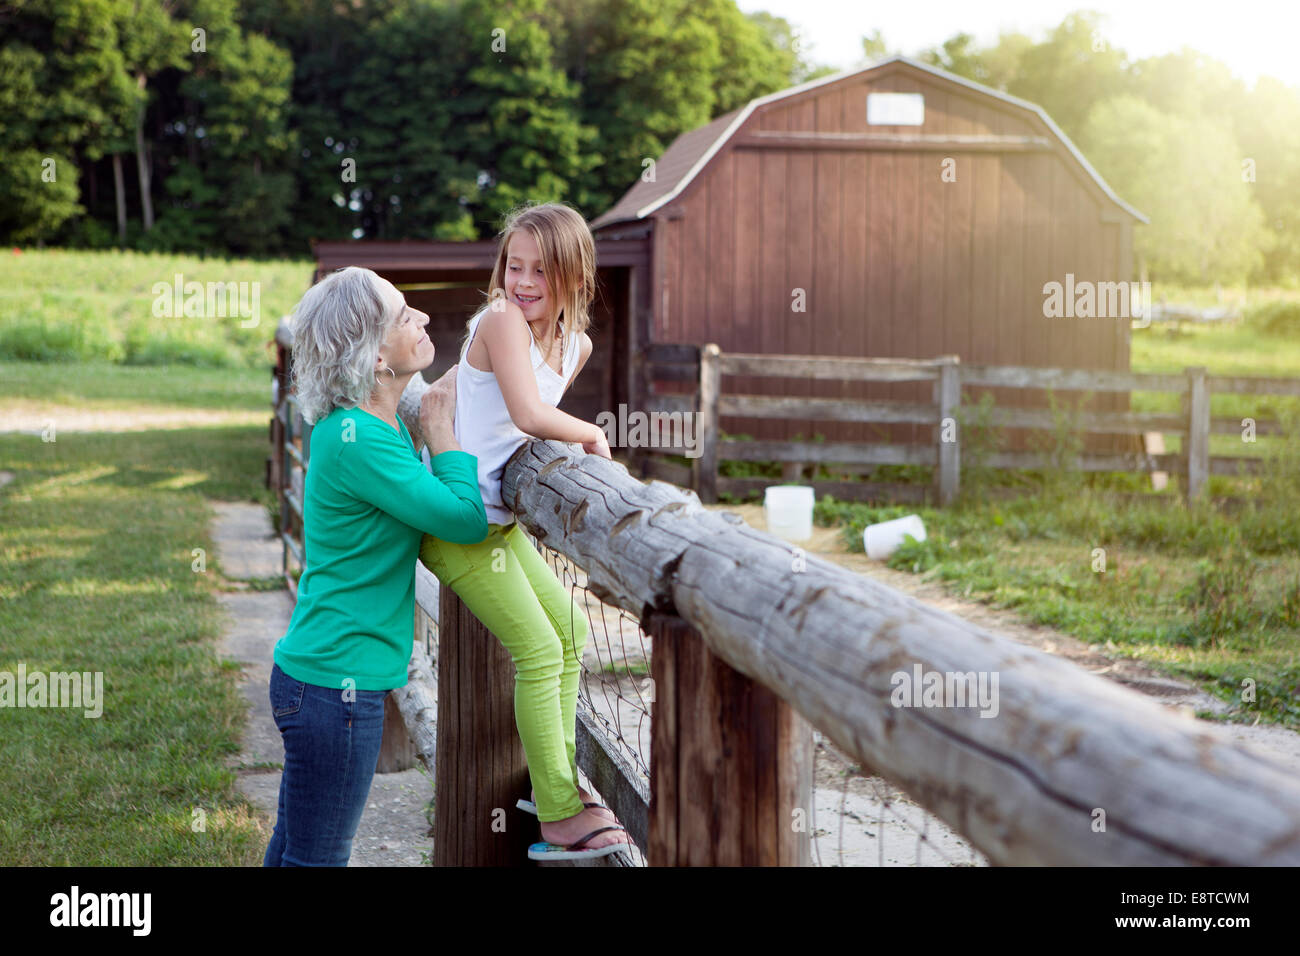 Caucasian grandmother and granddaughter smiling at farm fence Stock Photo